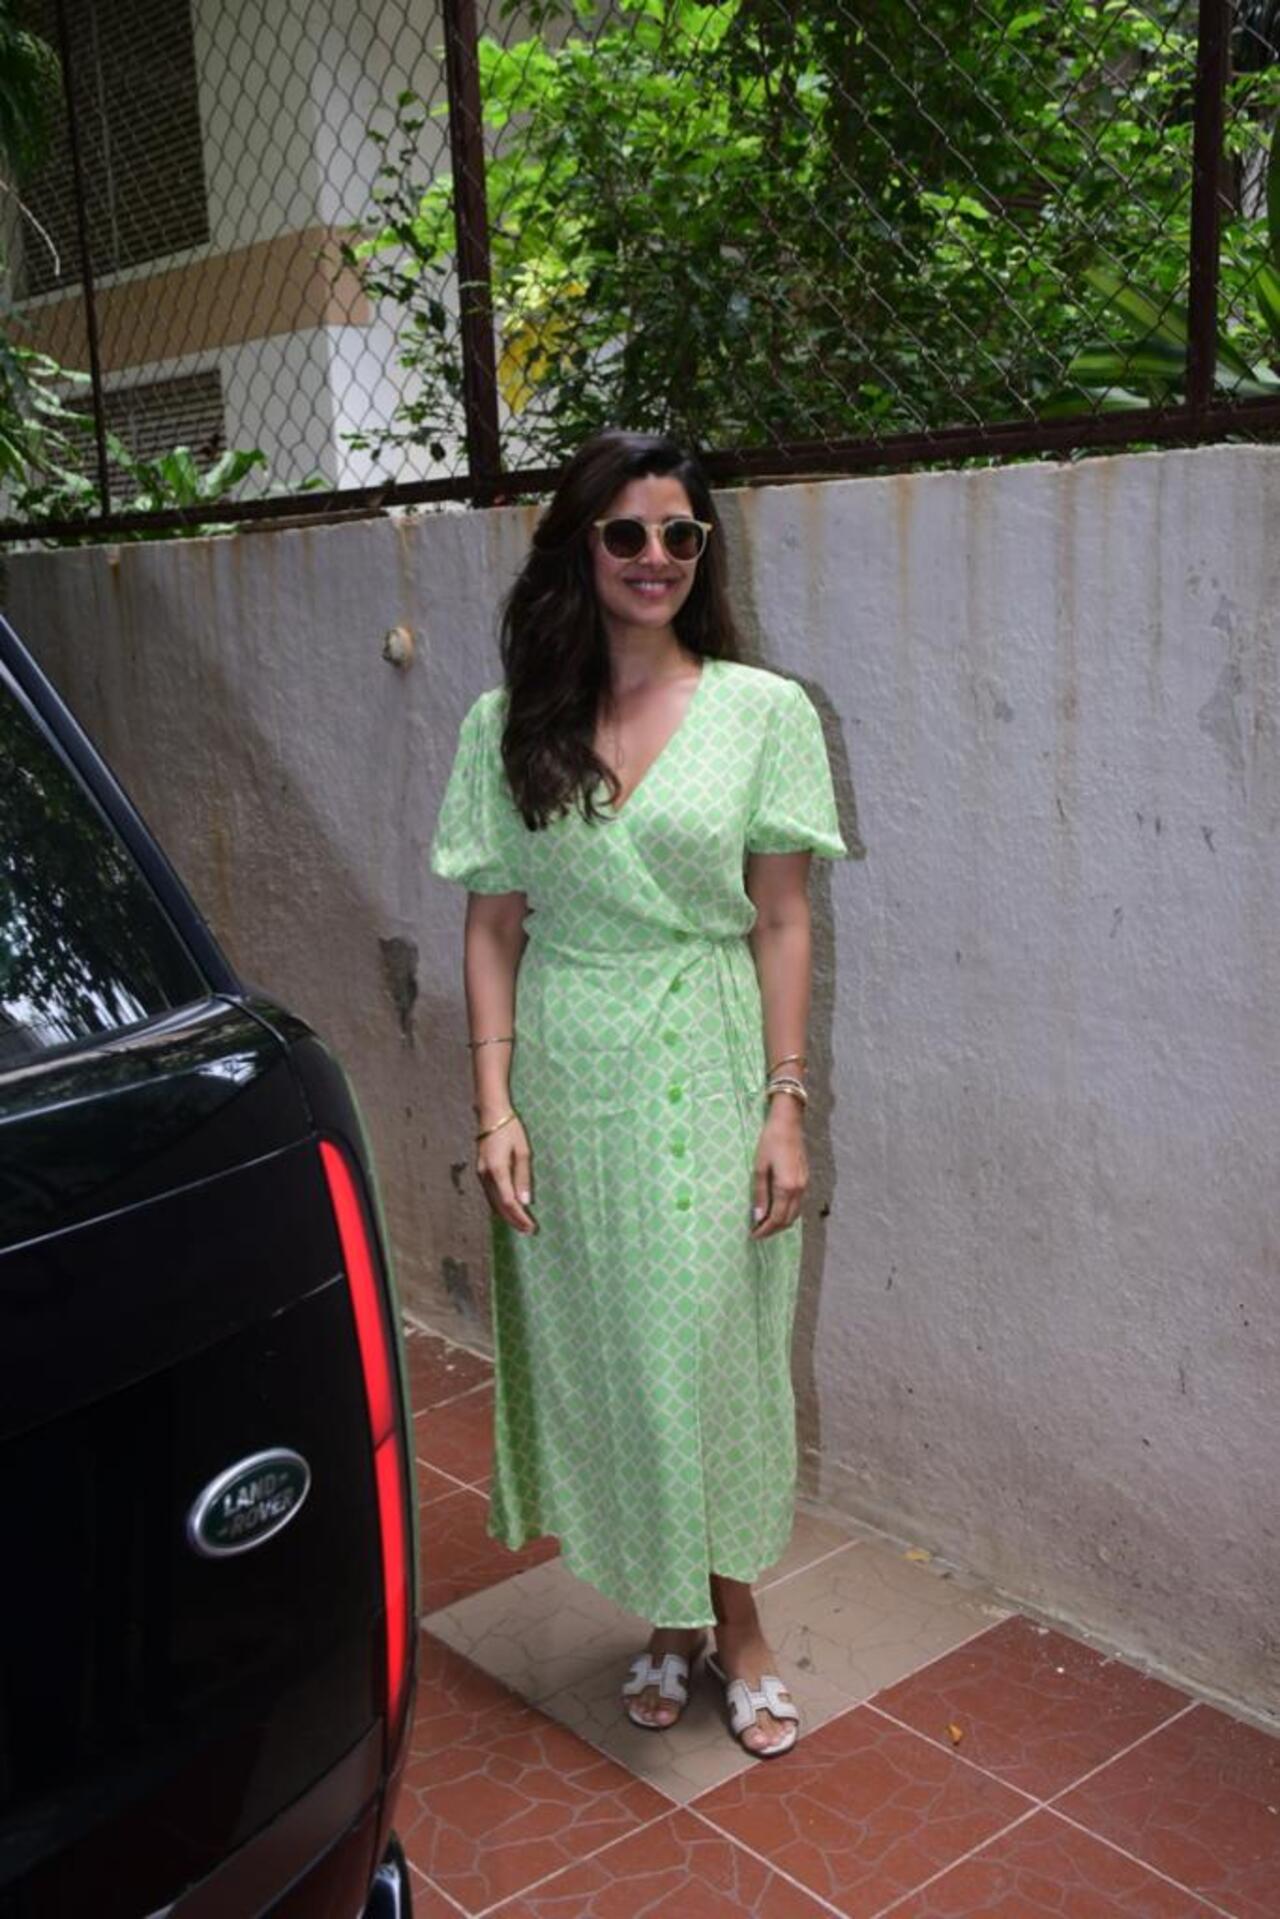 Nimrat Kaur stepped out to fulfill work commitments